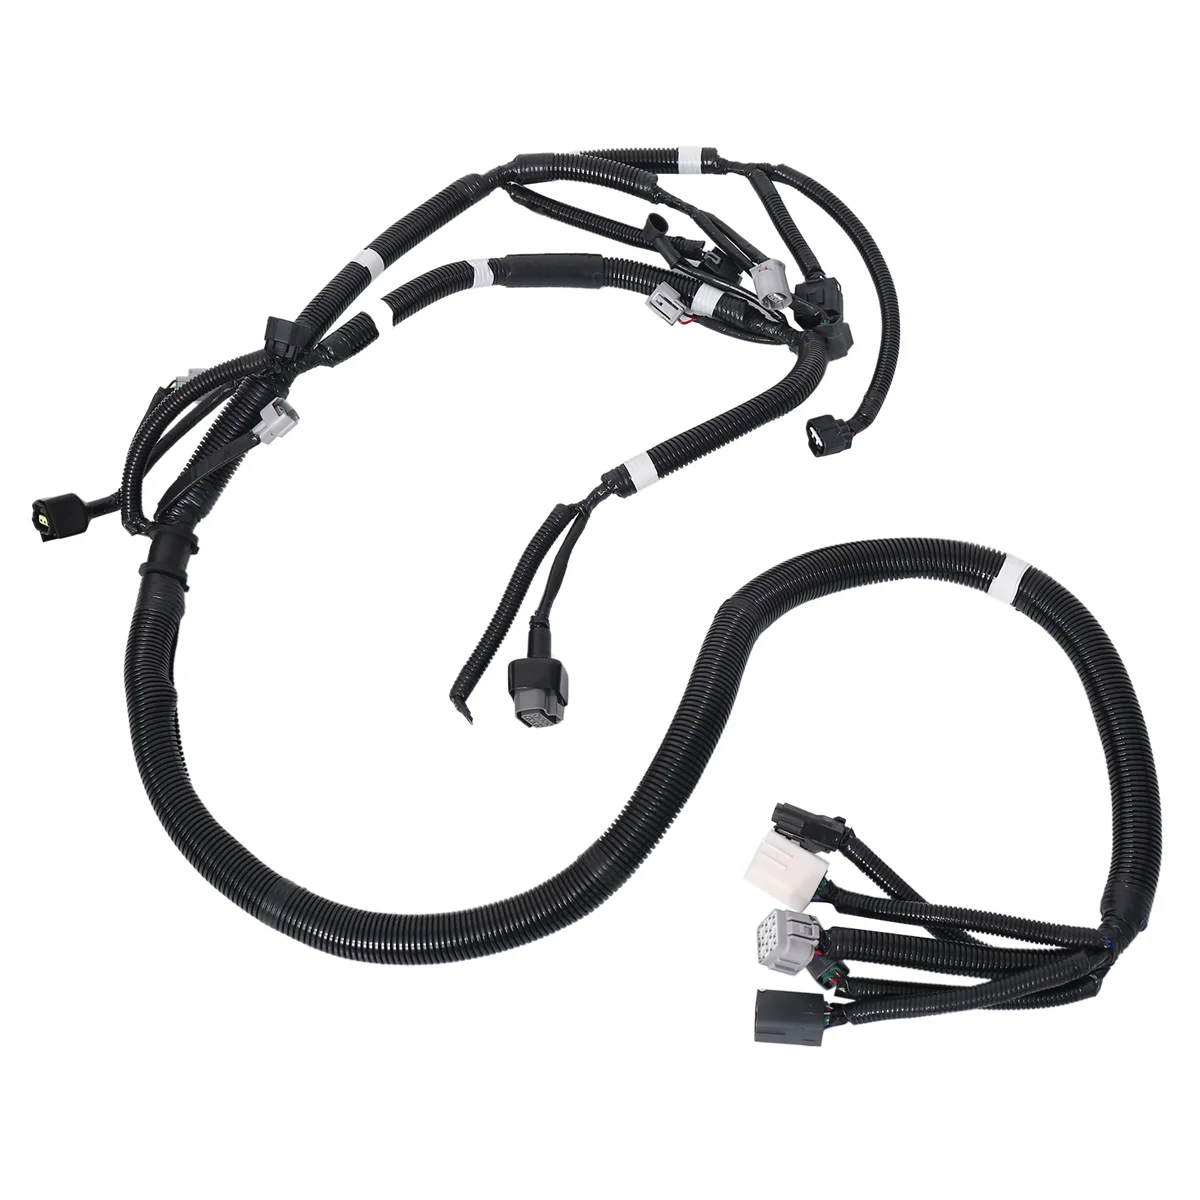 

Excavator Electrical Cable 4HK1 Engine Harness Engine Wiring for JS160 JS200 Part Number: 8980627092 721/12347 72112347